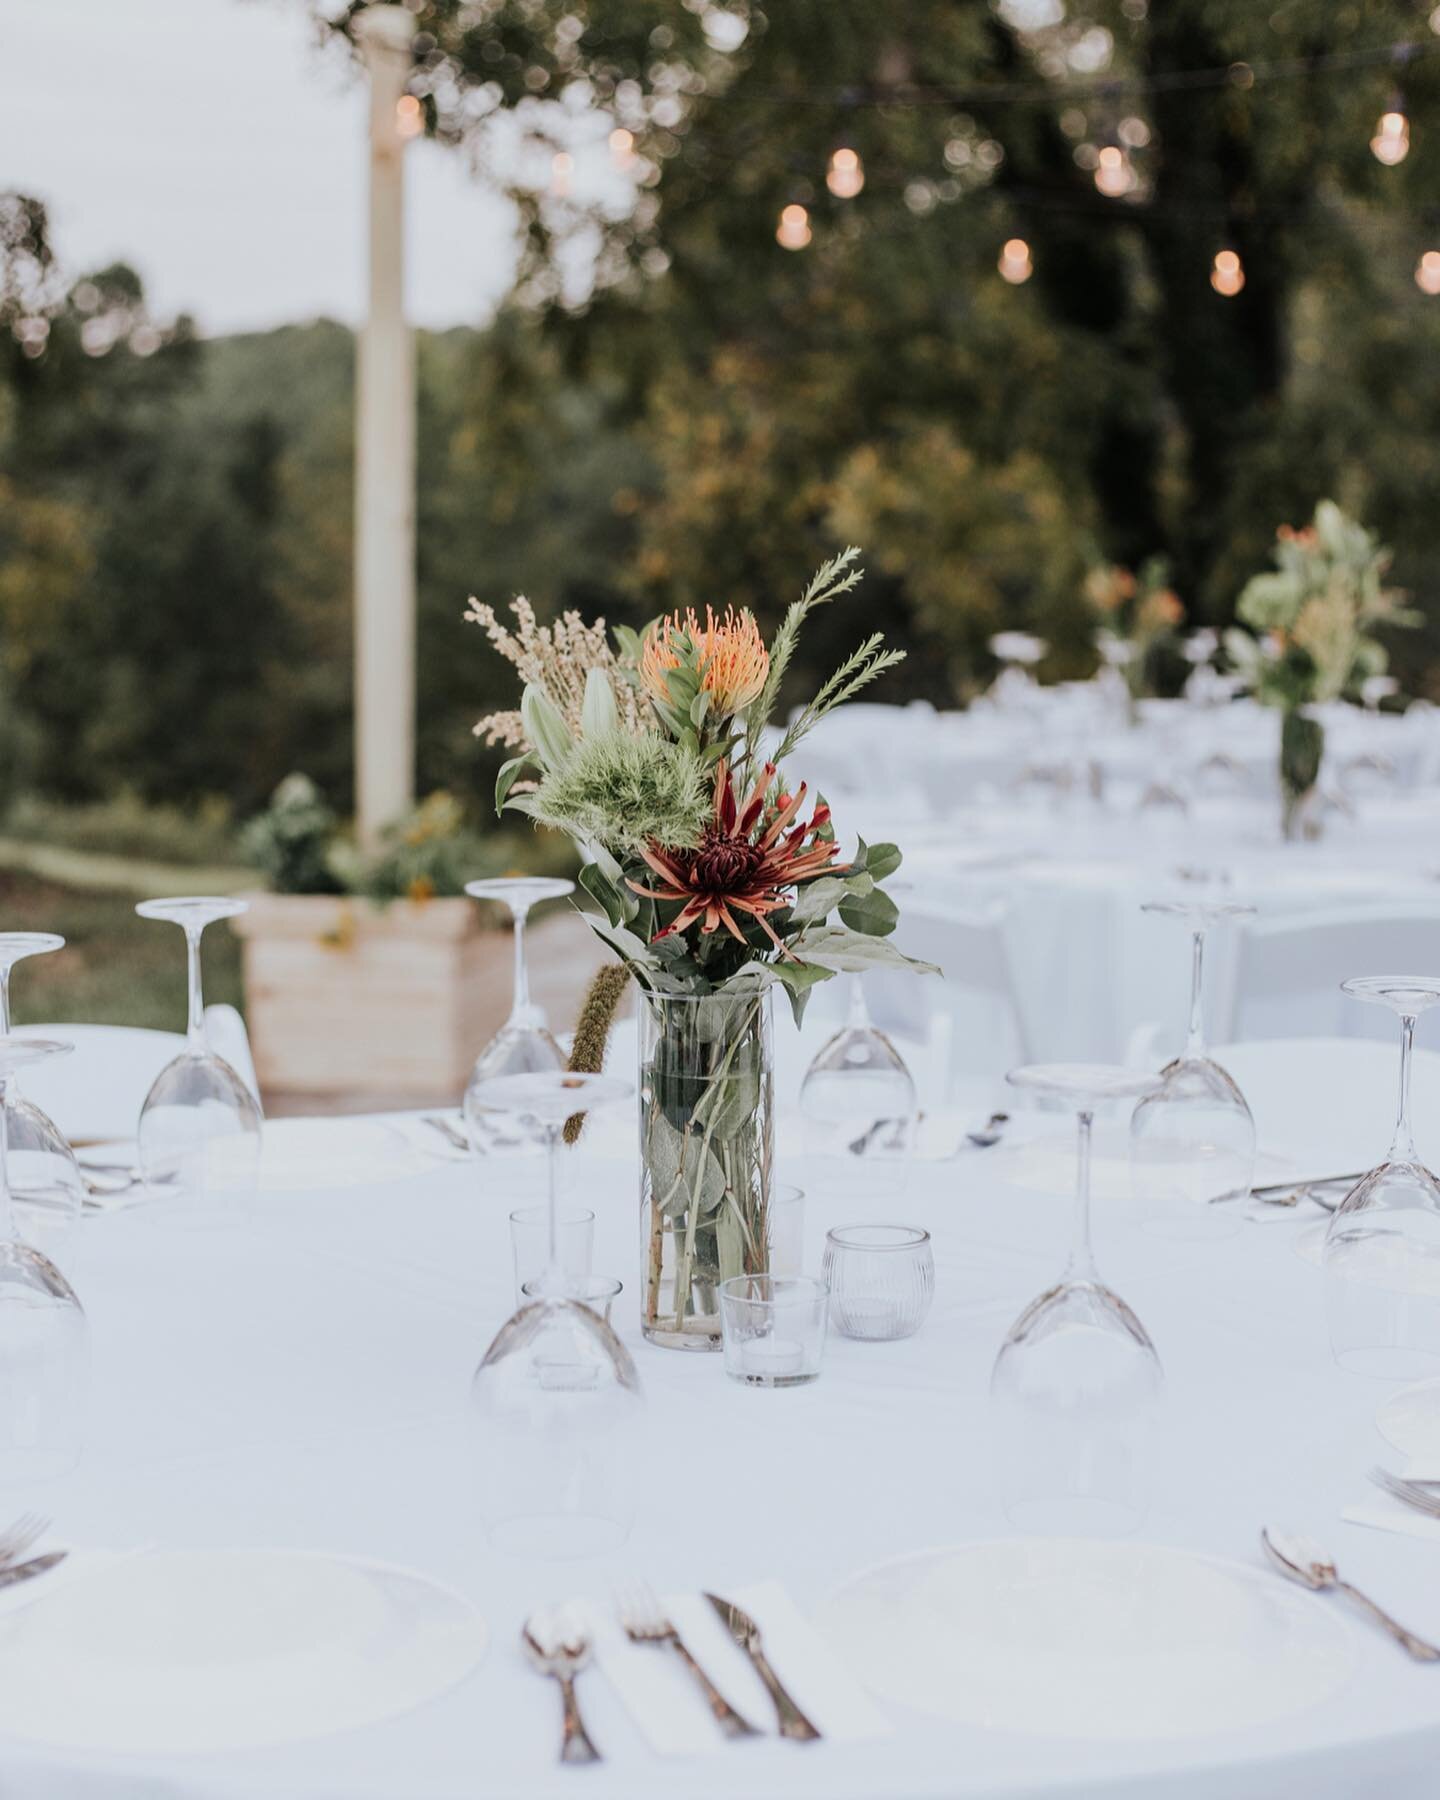 Did you know that we set up for your rehearsal? We make sure the tables and chairs are placed perfectly to accommodate your needs. We make sure our white table cloths are pressed and looking their best! We want everything perfect for your PERFECT wed